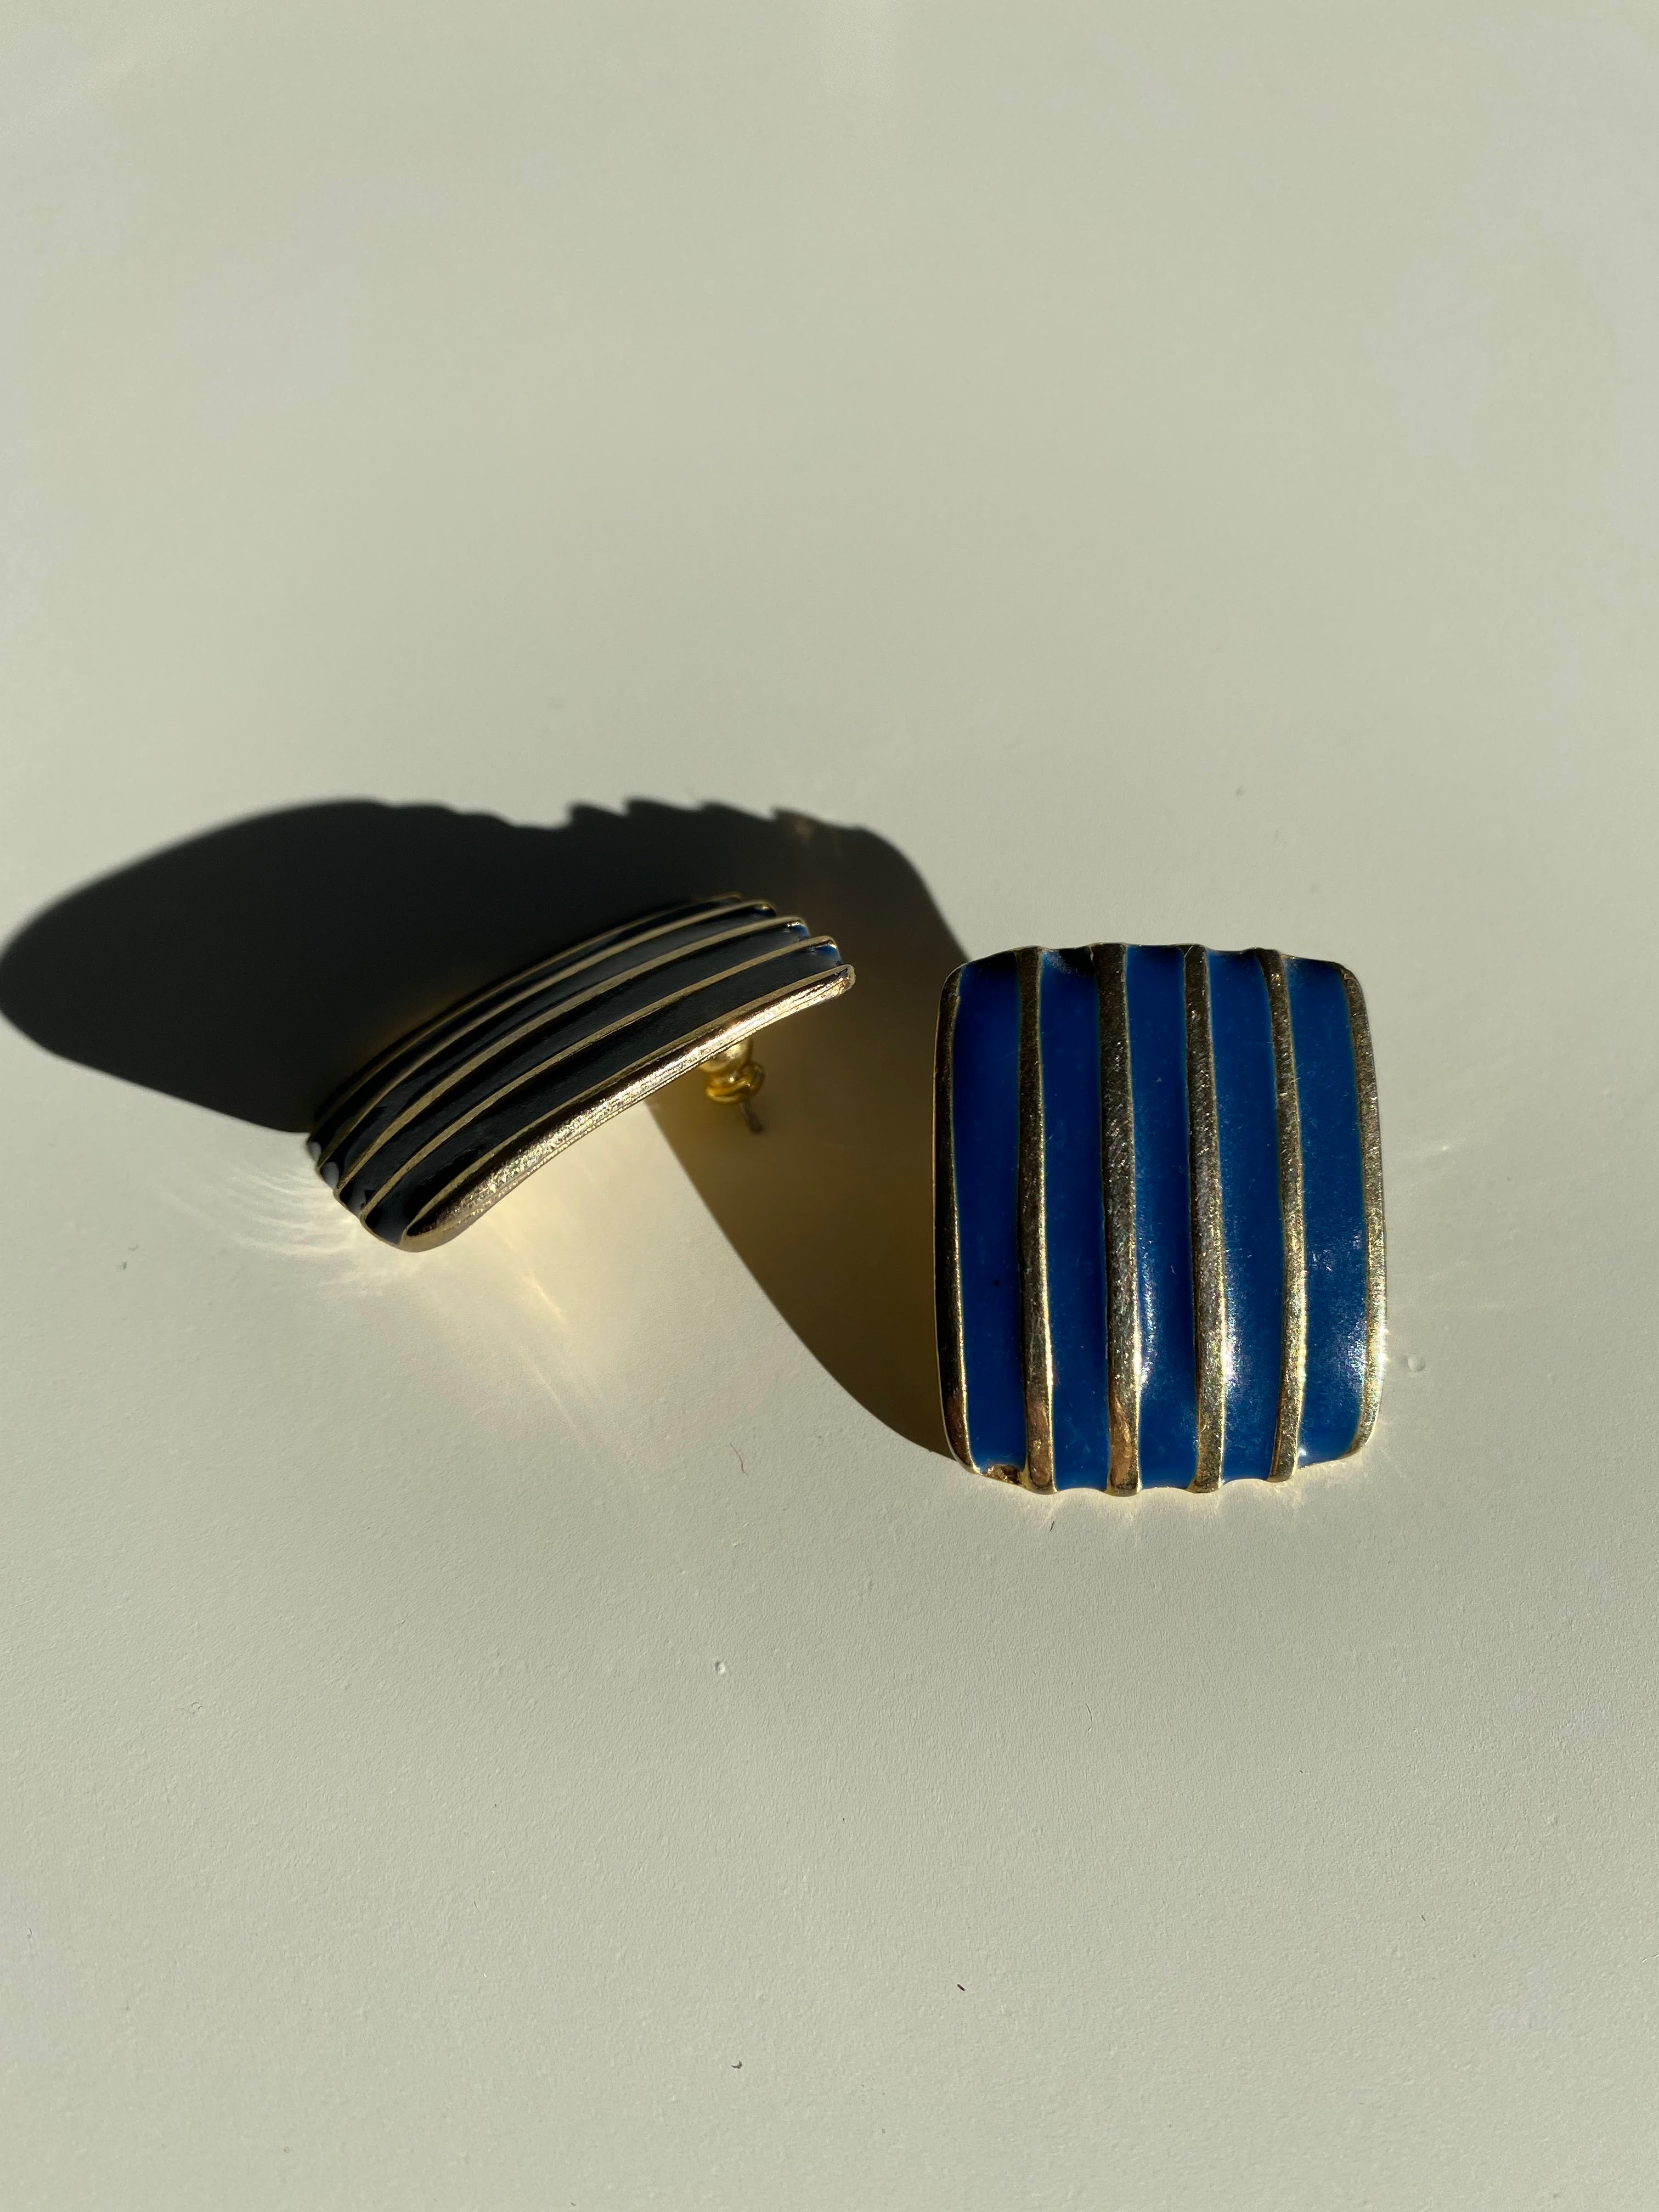 Blue and Gold Tone Striped Square Earrings